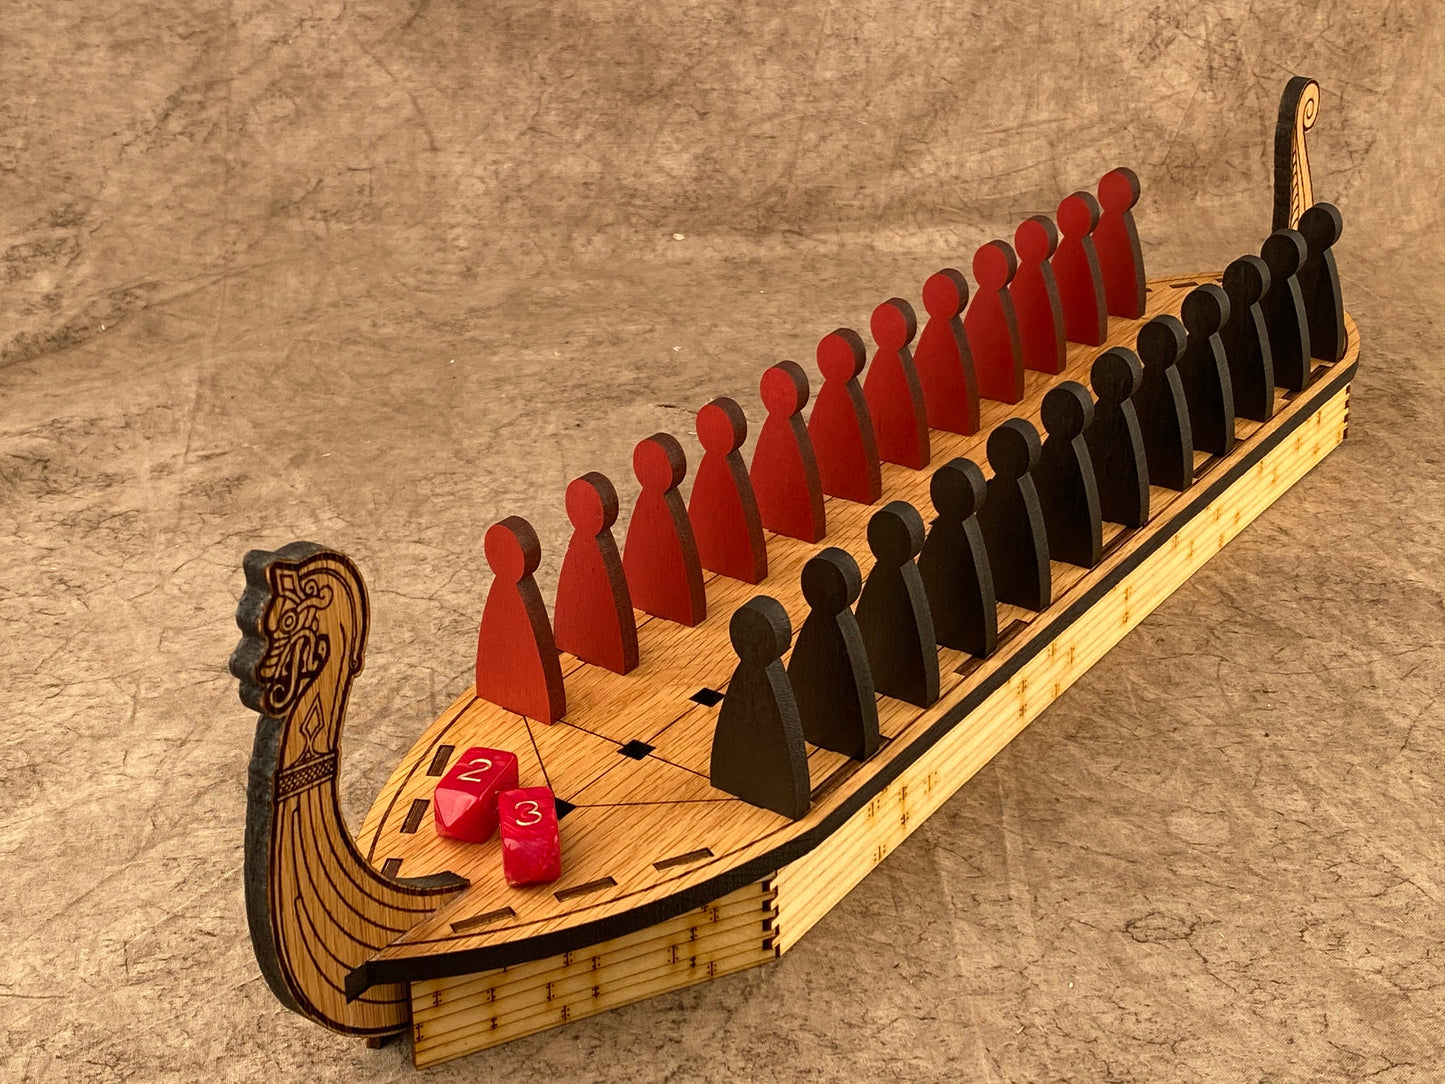 DALDOS! The Viking Game of Ship Board BATTLE! Scandinavian Design, an Ancient Game from the Dawn of the Vikings.